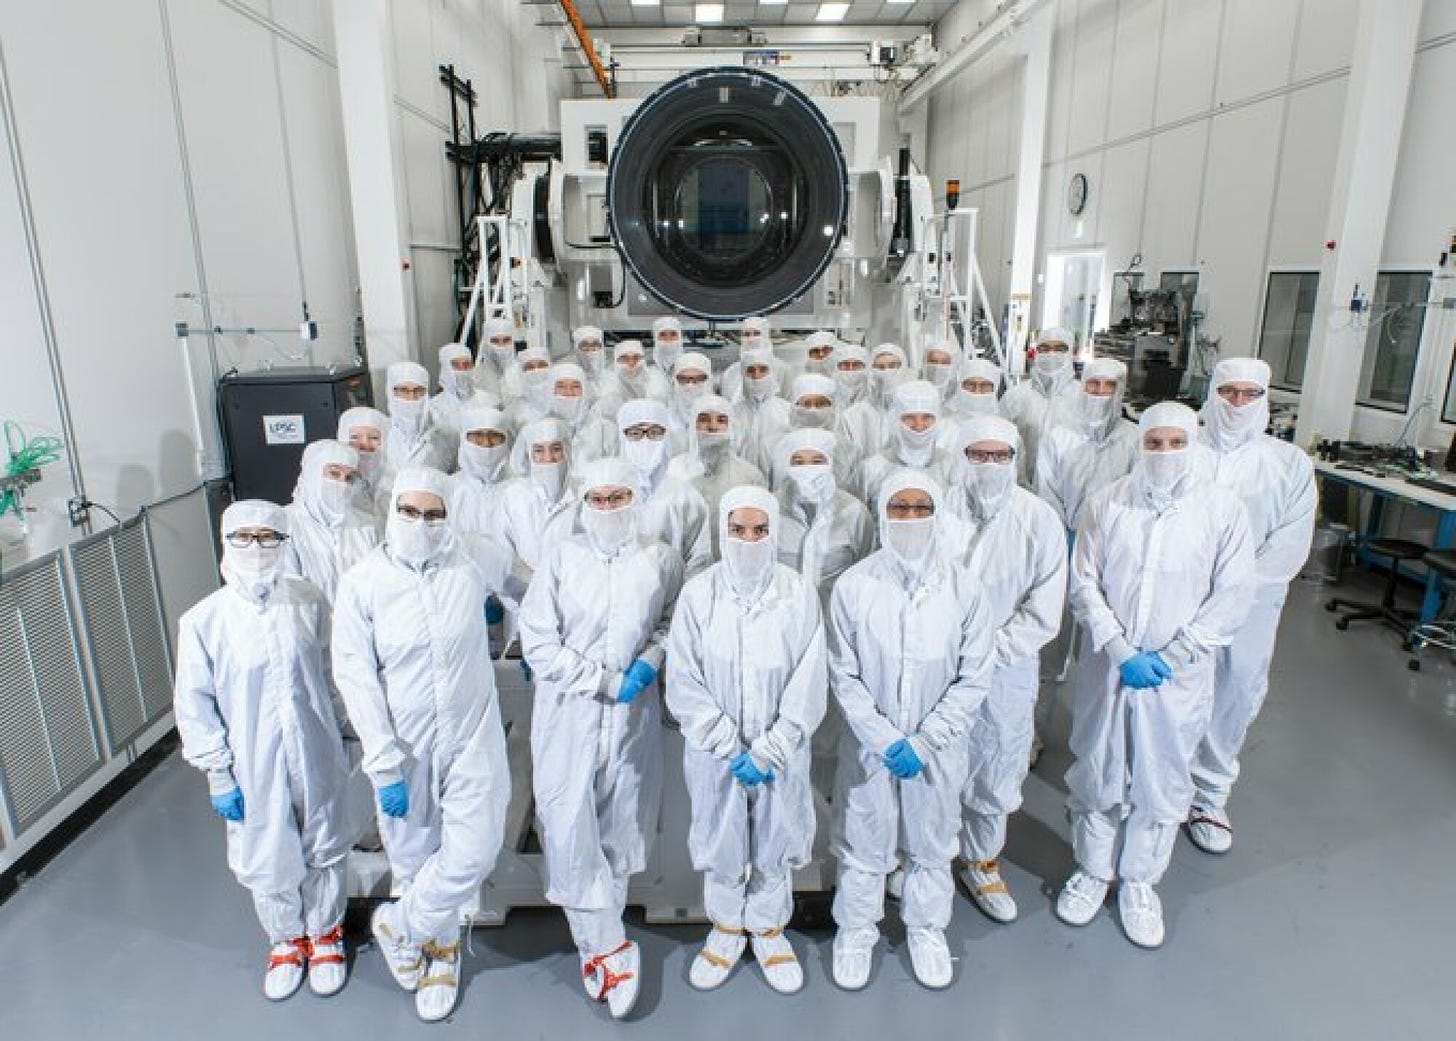 The SLAC team building the LSST camera pose in front of the instrument in a clean room in Menlo Park, California.